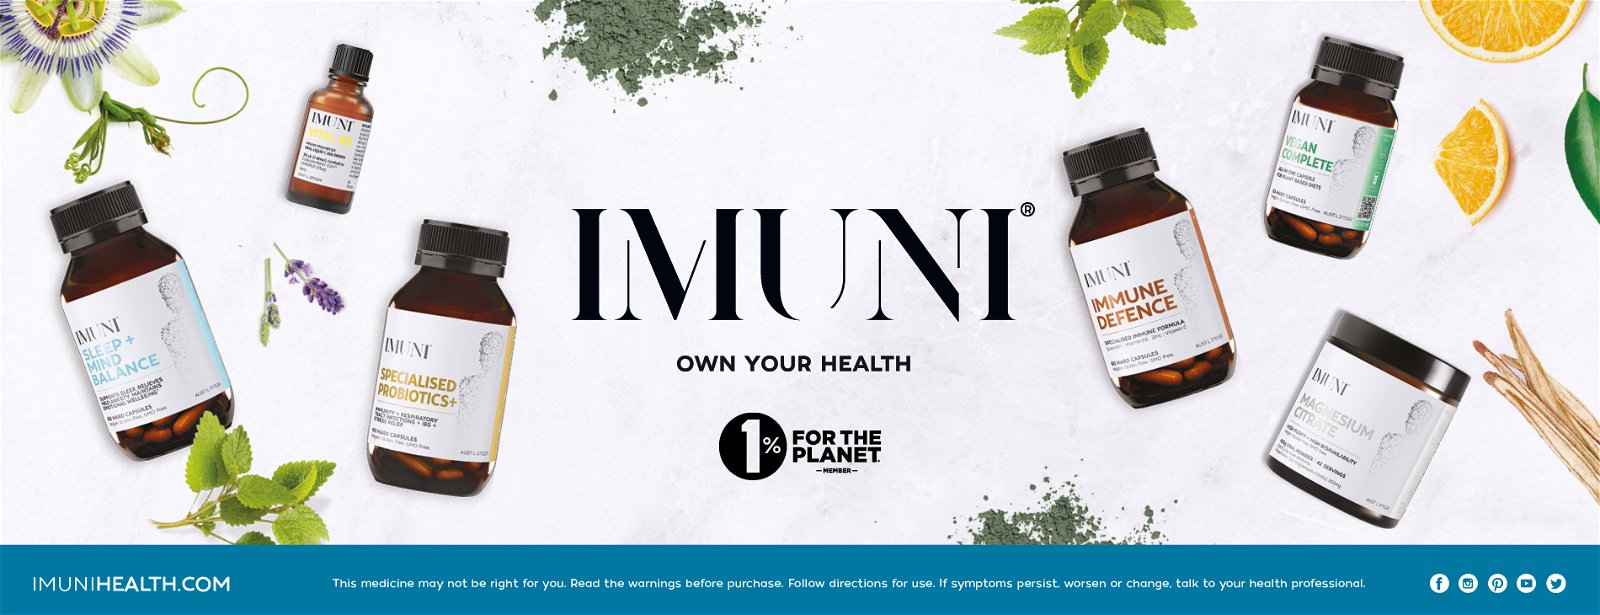 OWN YOUR HEALTH WITH IMUNI